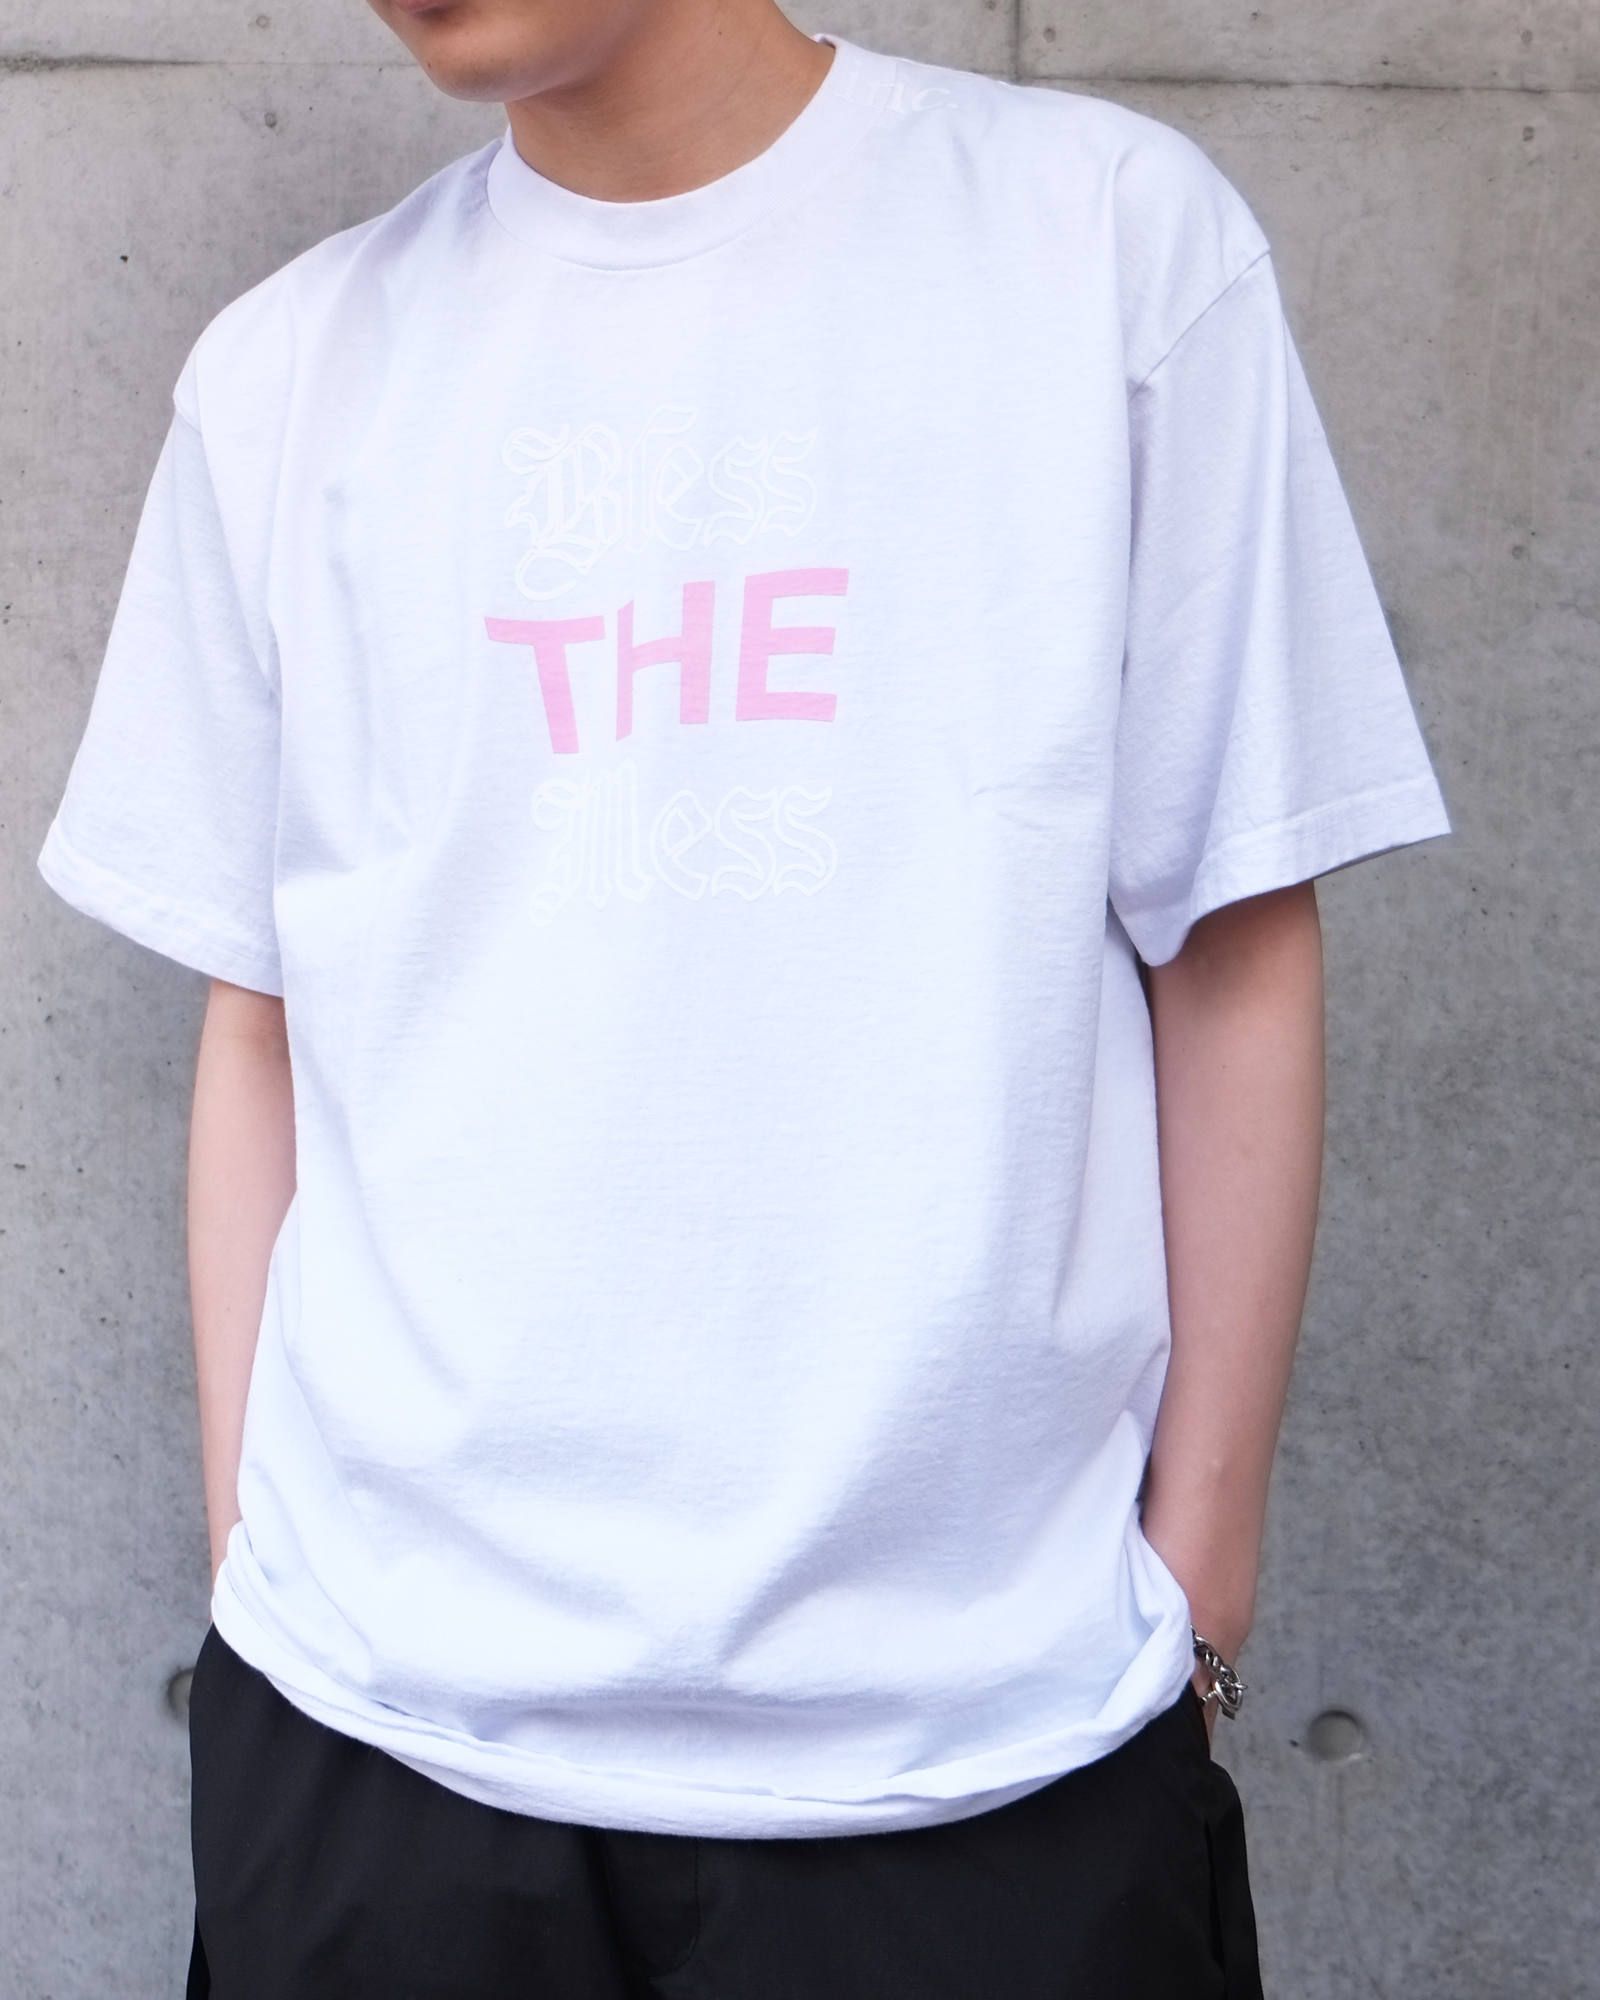 The incorporated - Bless The Mess T Shirt | fakejam